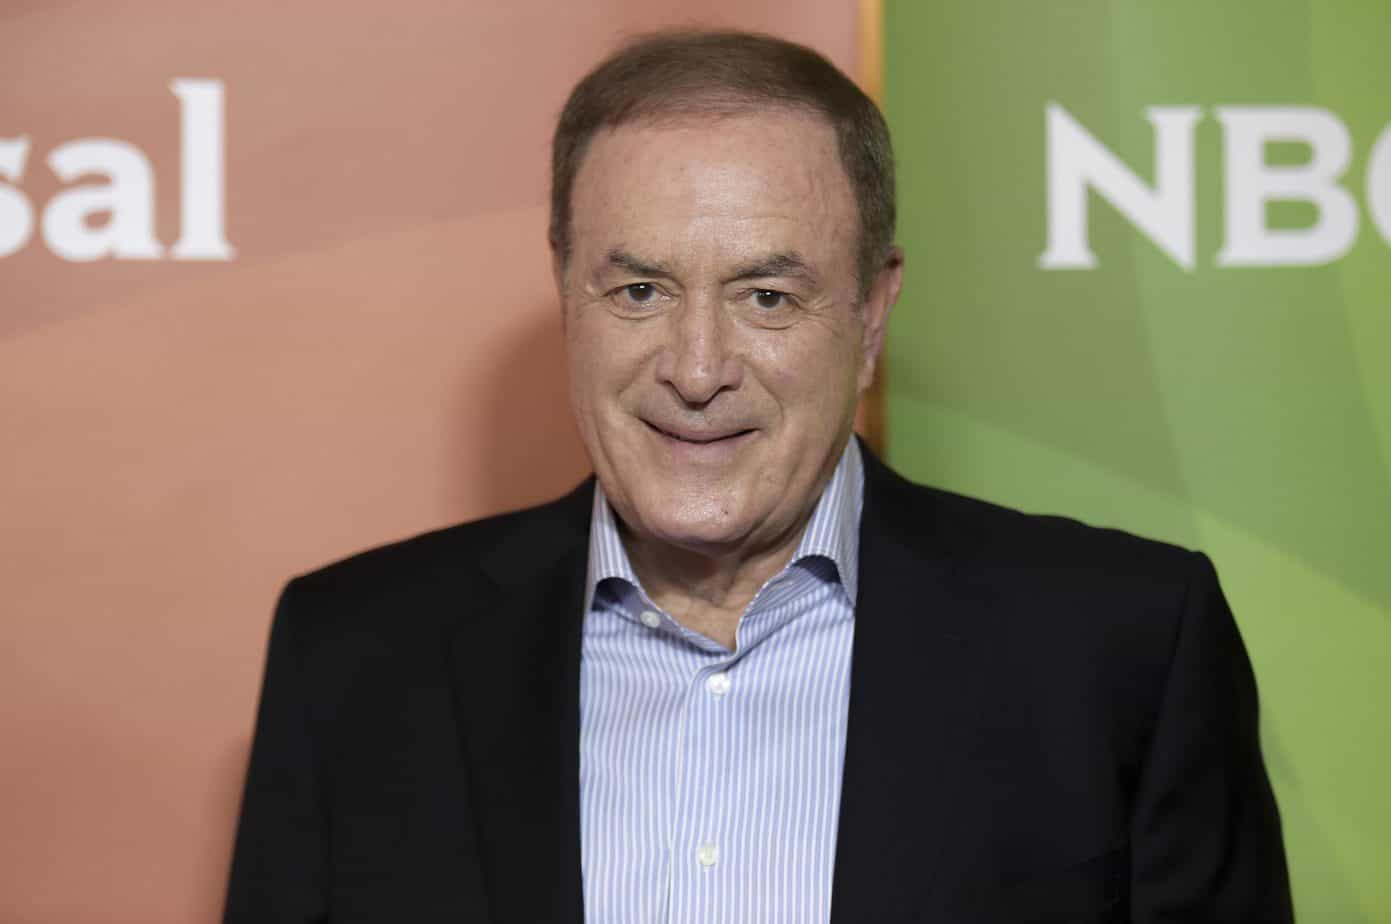 According to a report, ESPN is in pursuit of legendary play-by-play man Al Michaels to announce alongside Troy Aikman starting next season